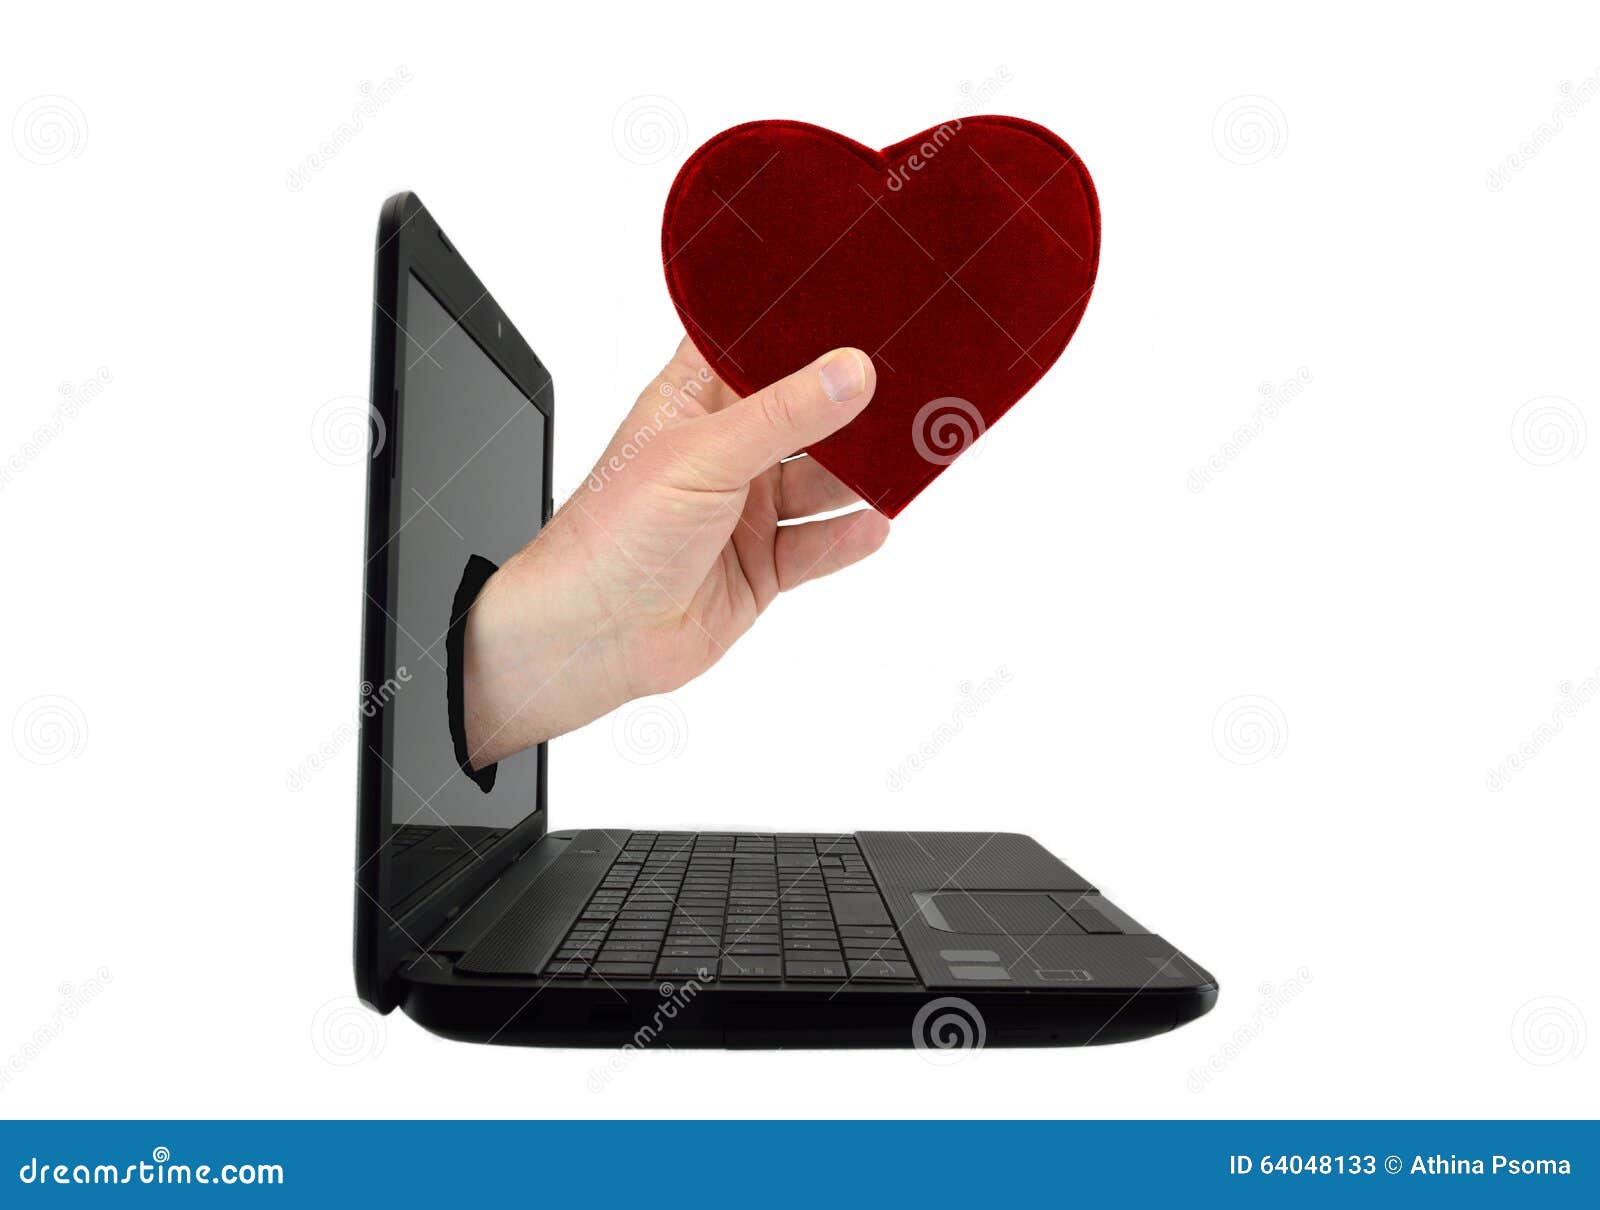 Finding Love: online romance scams